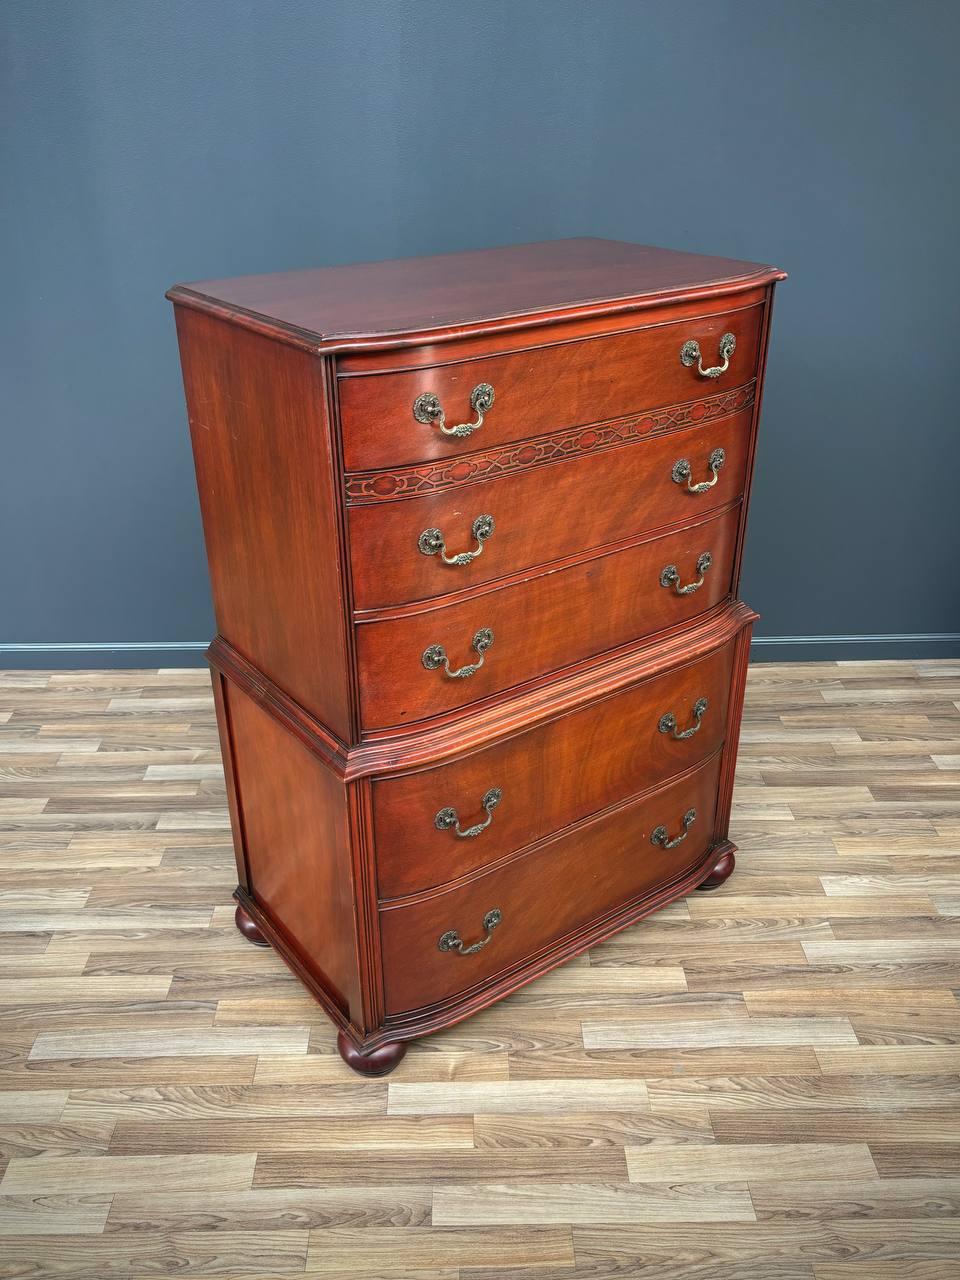 Other Antique Federal Style Mahogany Highboy Dresser